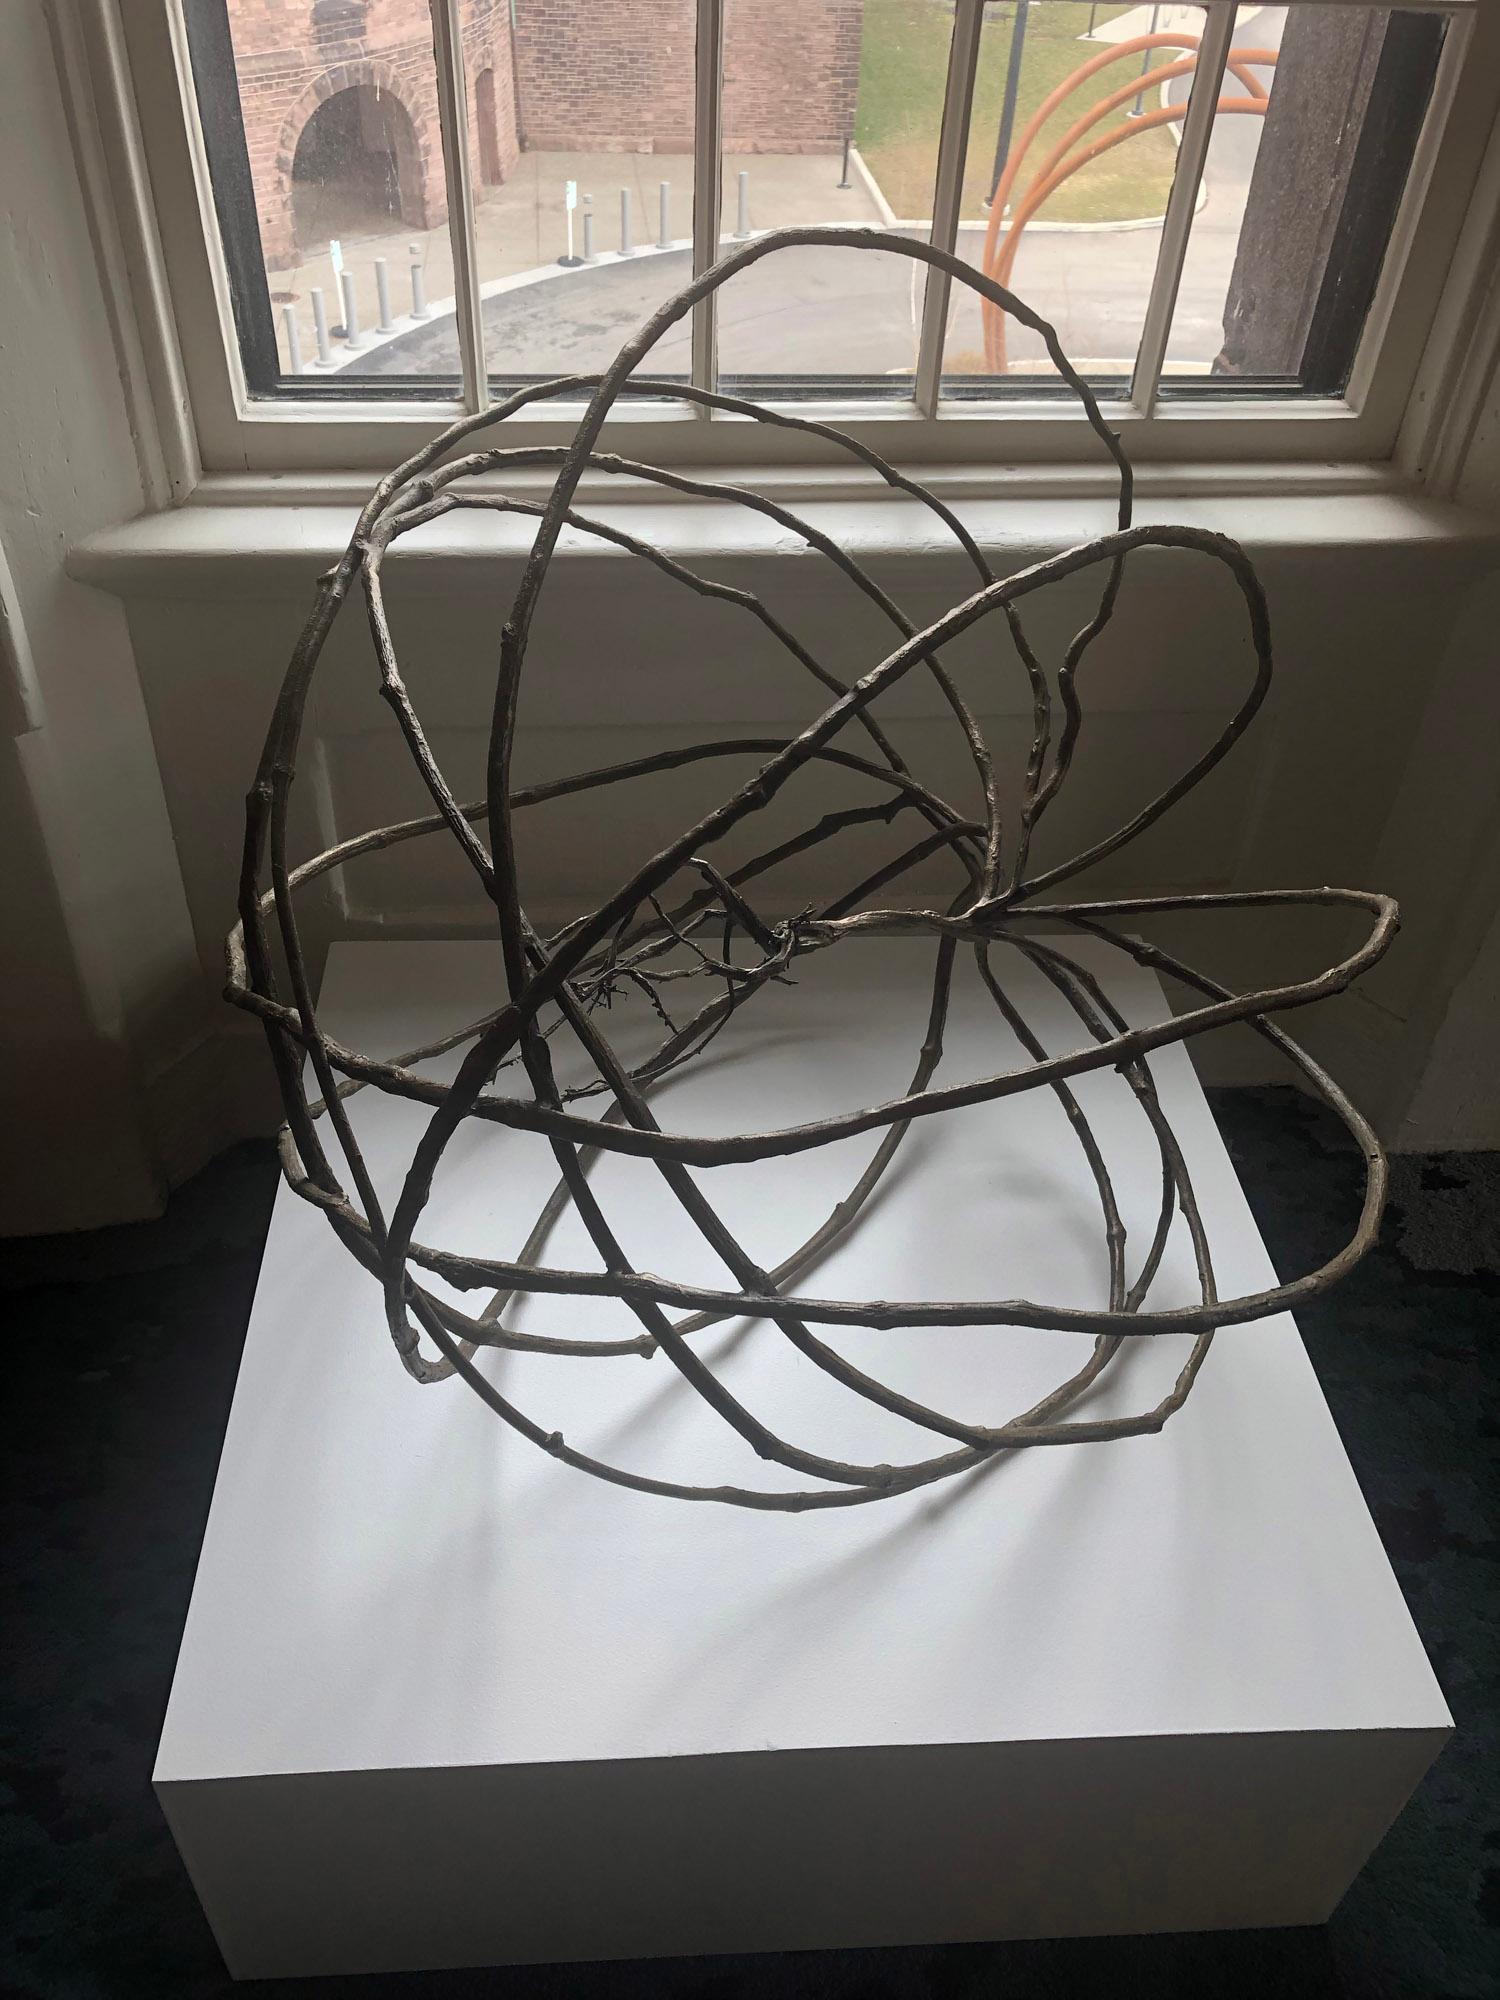 An original unique bronze sculpture by Canadian contemporary artist Reinhard Reitzenstein.

This incredible work is part of the artist's solo exhibition at The Corridors Gallery at Hotel Henry.  

This rare sculpture is one of the last that